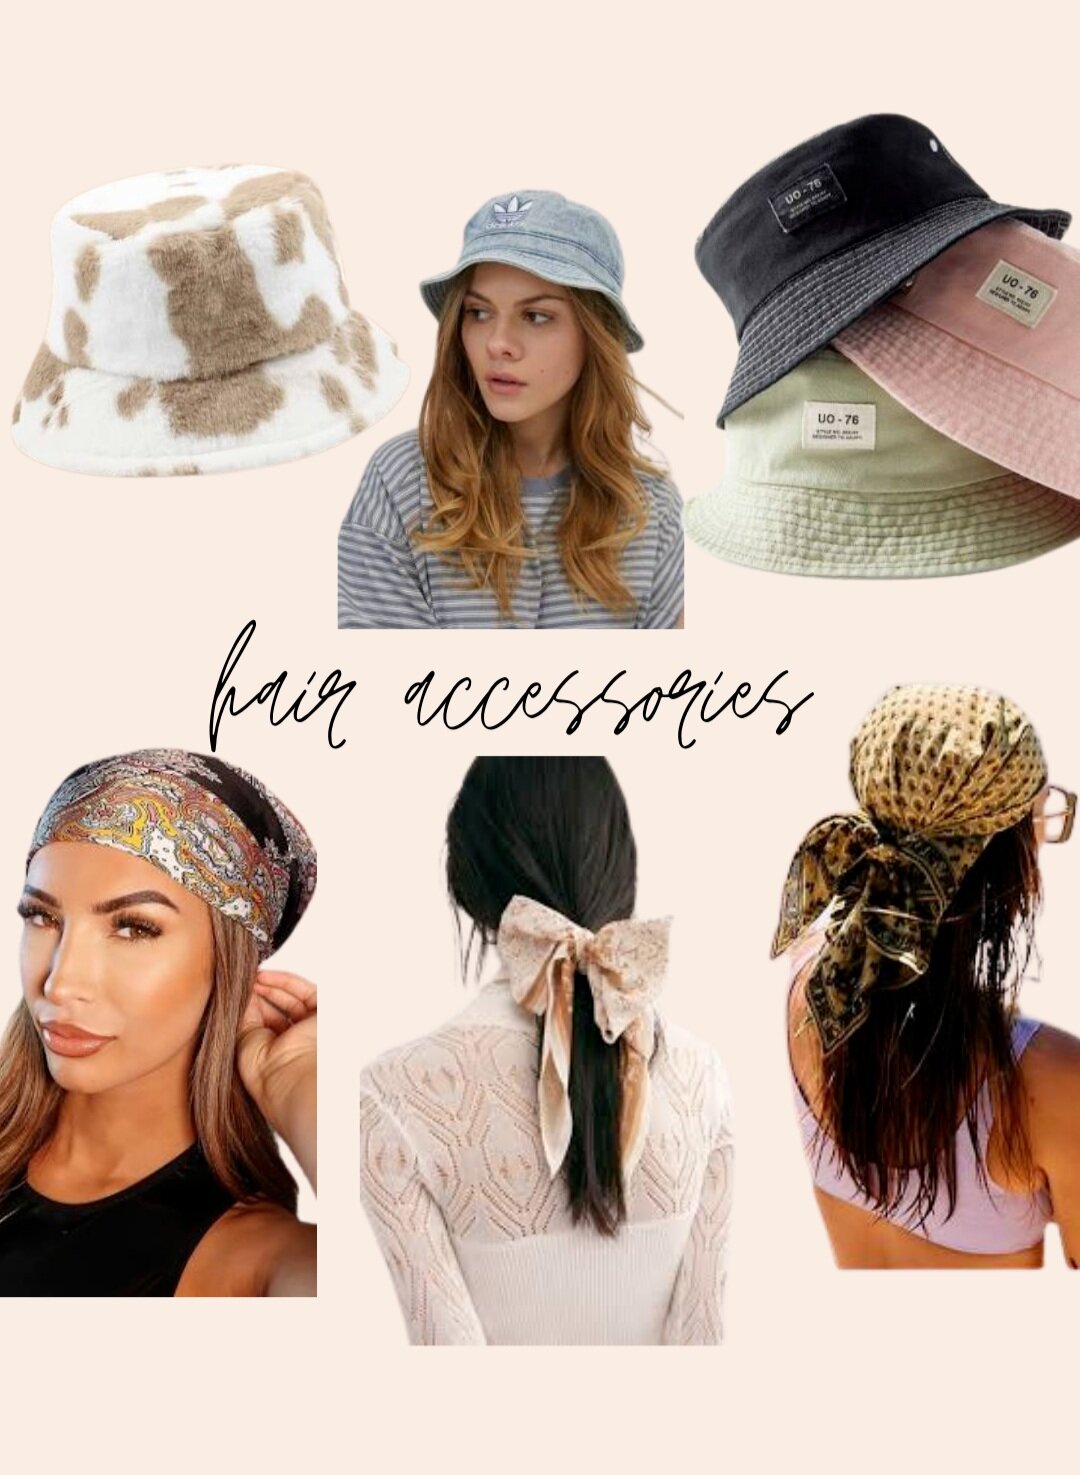 2) Hair Accessories - Yes, the bucket hat trend is here to stay. A good neutral way to try it out is a light denim one for spring.Also, hair scarves are all the rage! There are about 48372 ways to wear them and they add so much fun to any outfit.